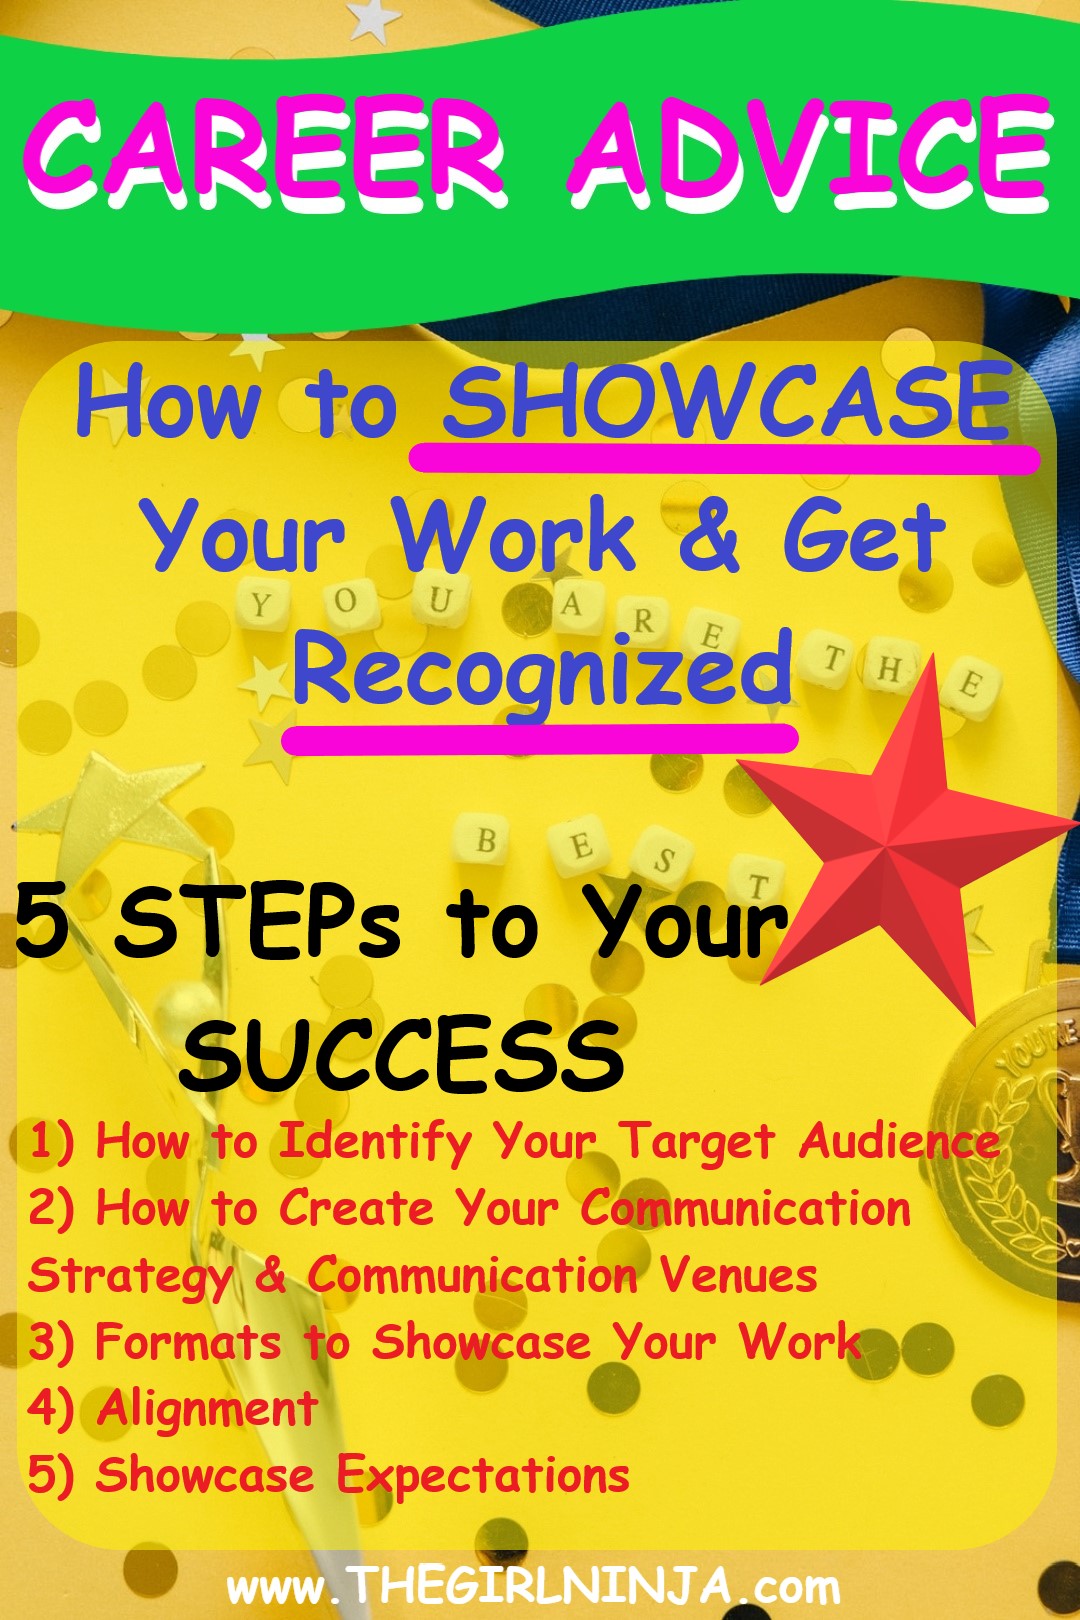 Yellow surface with green banner across the top that reads CAREER ADVICE in pink & white. Below, blue text reads How to SHOWCASE Your Work & Get RECOGNIZED. Then black text reads 5 STEPs to Your SUCCESS with red text below that reads 1) Identify your target audience, 2) Communication, 3) Formats, 4) Alignment, 5) Showcase Expectations. At bottom center white text reads www.thegirlninja.com